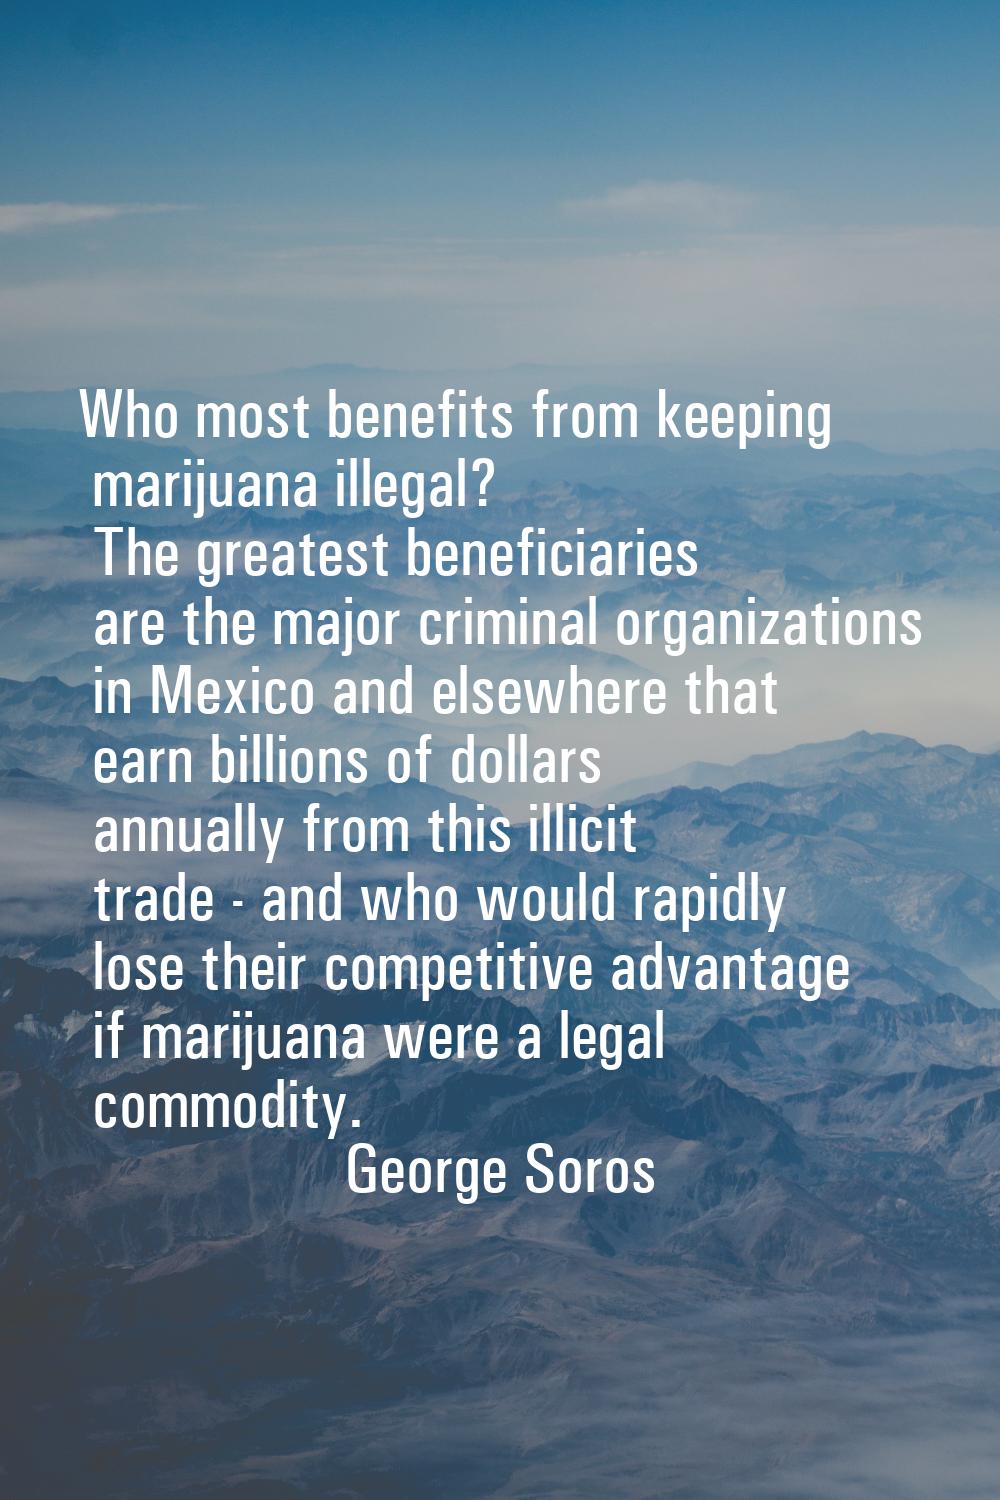 Who most benefits from keeping marijuana illegal? The greatest beneficiaries are the major criminal